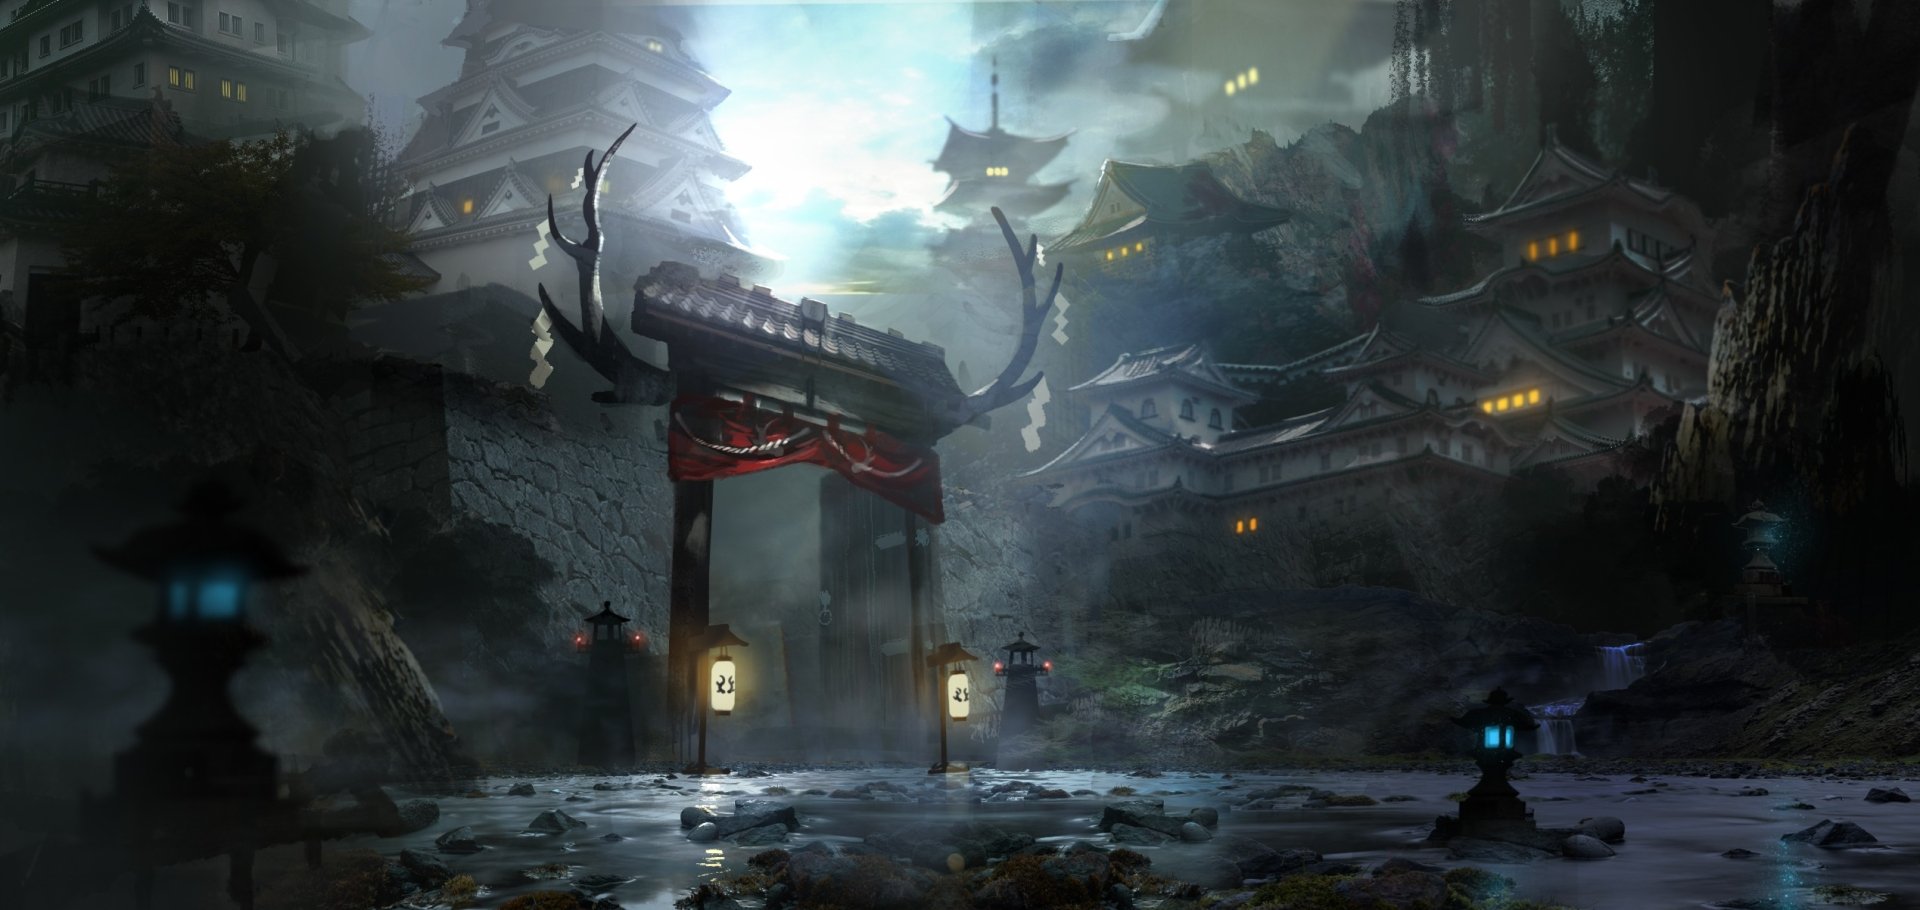 Download Anime Temple HD Wallpaper by ムシウニ